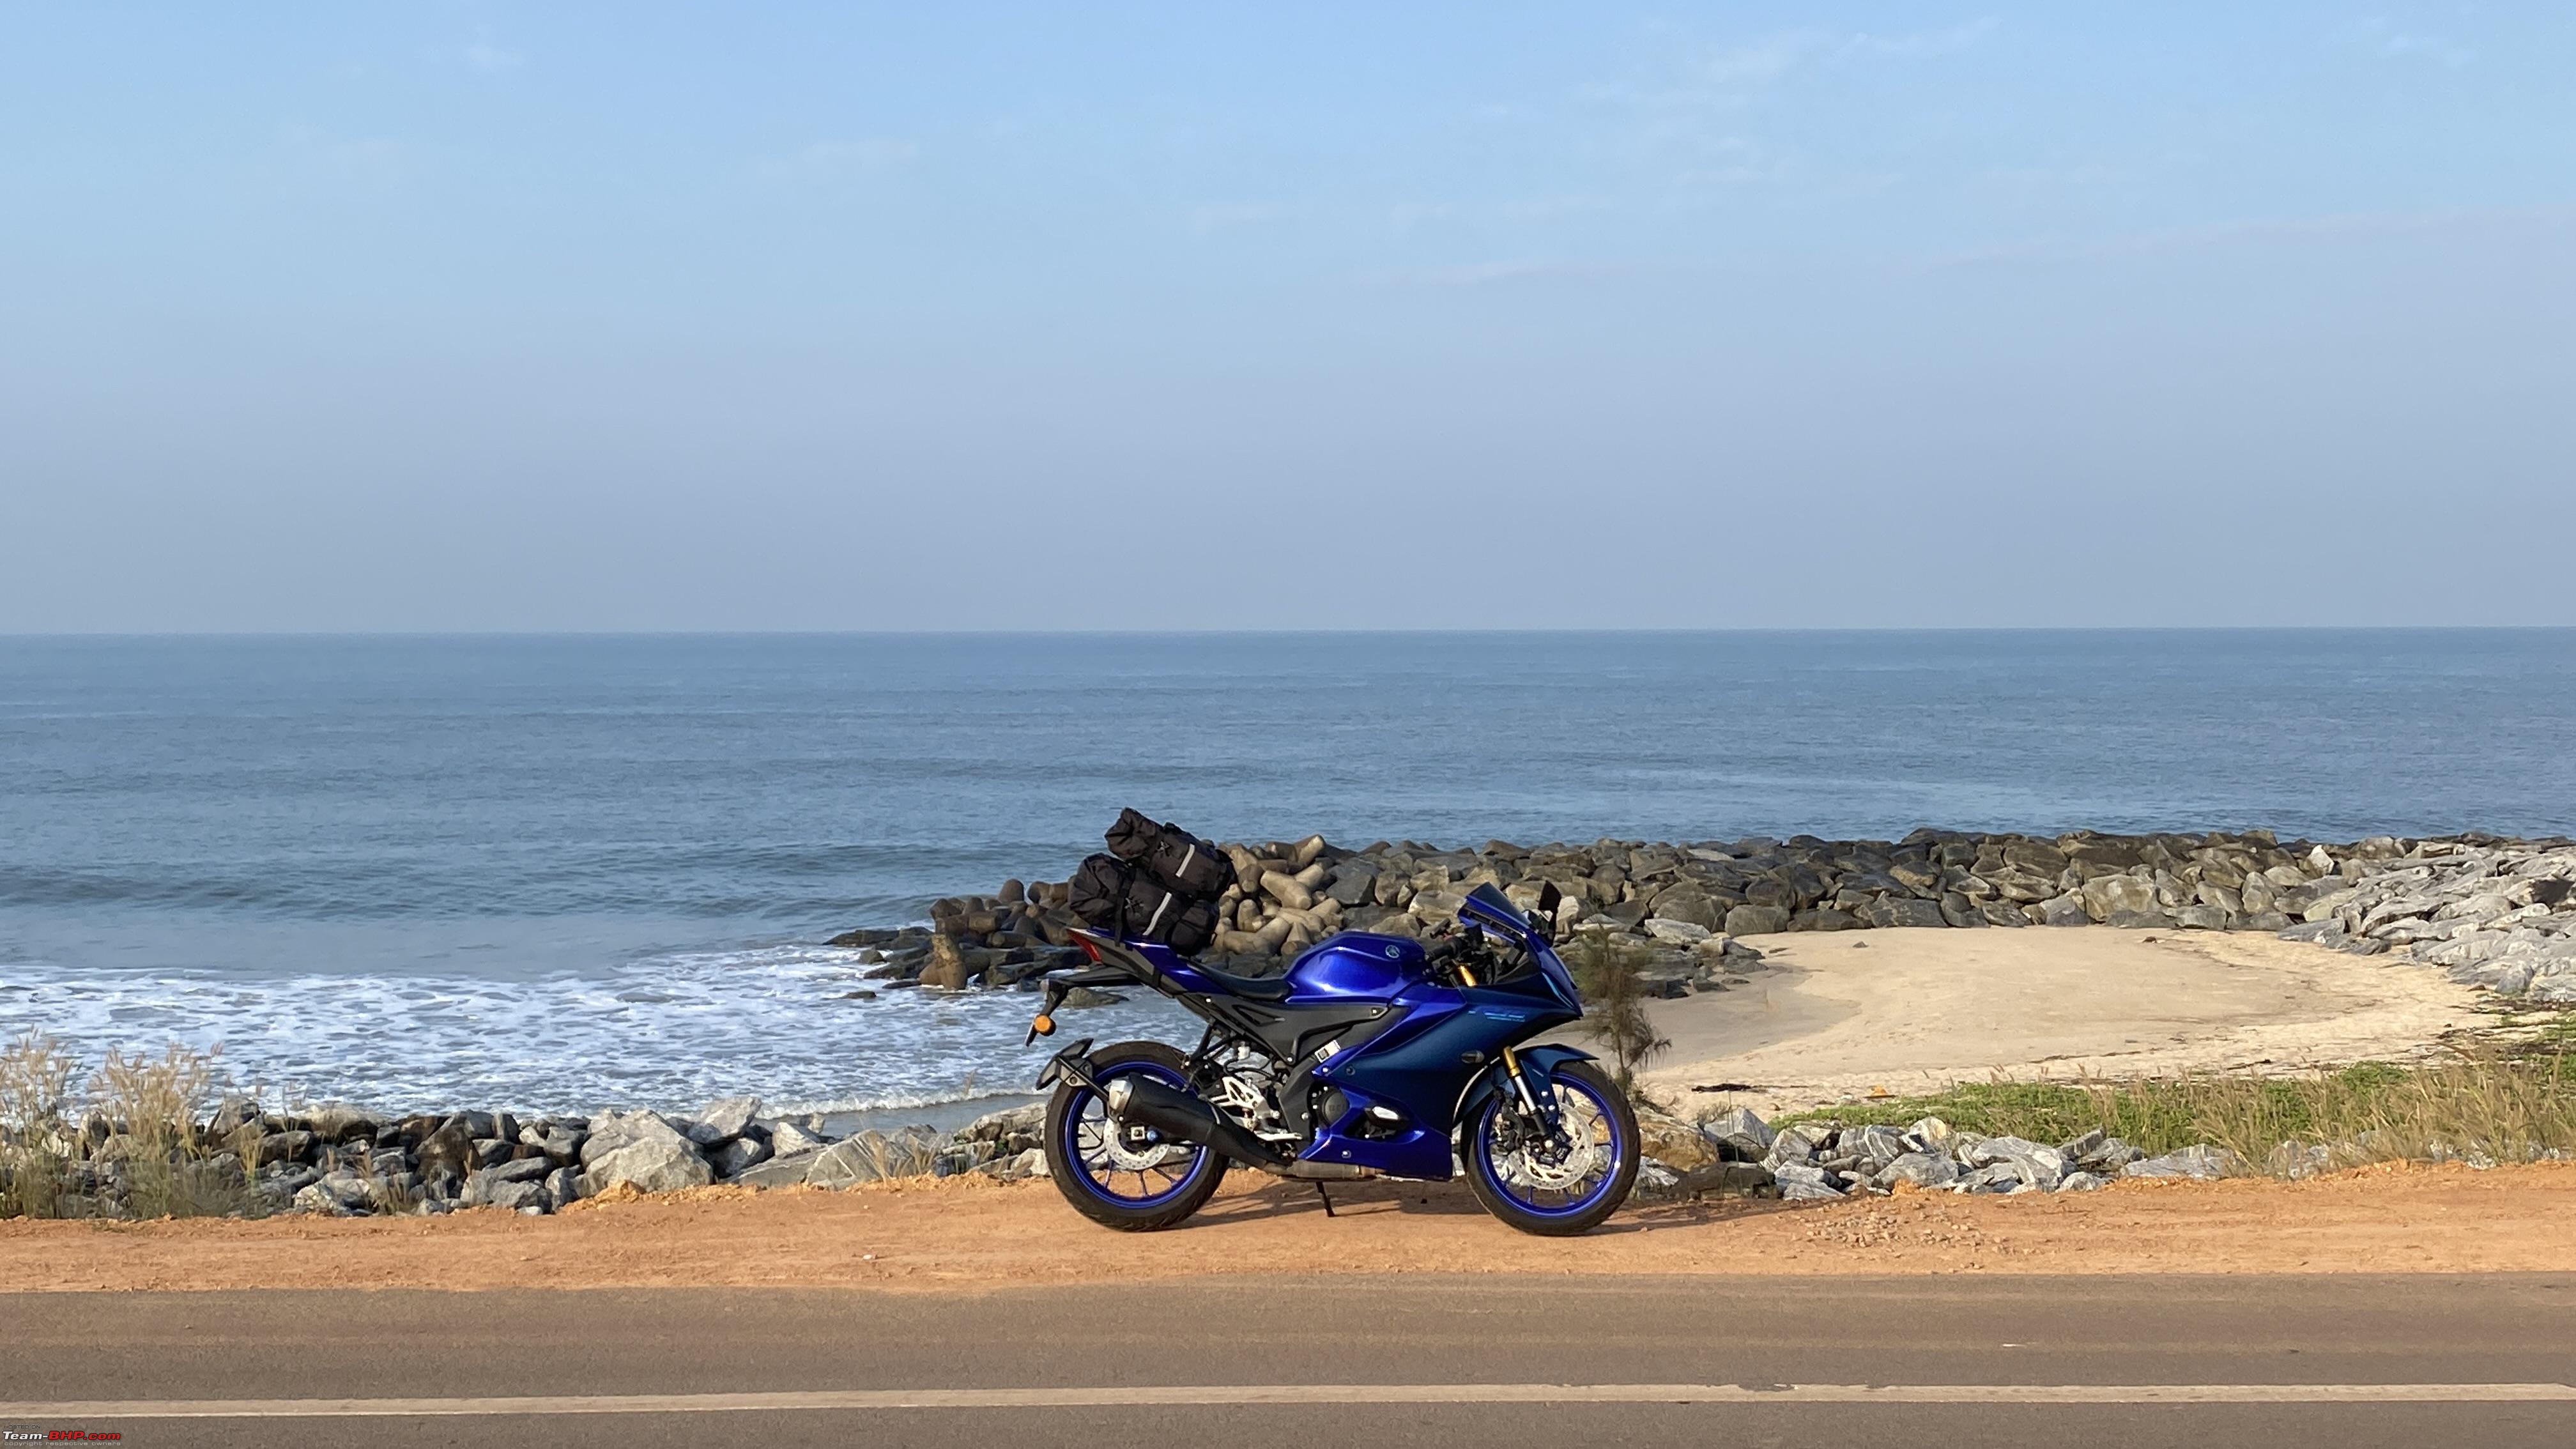 Yamaha YZF R15 V3.0 Price, Images, Colours, Mileage, Specs & Reviews